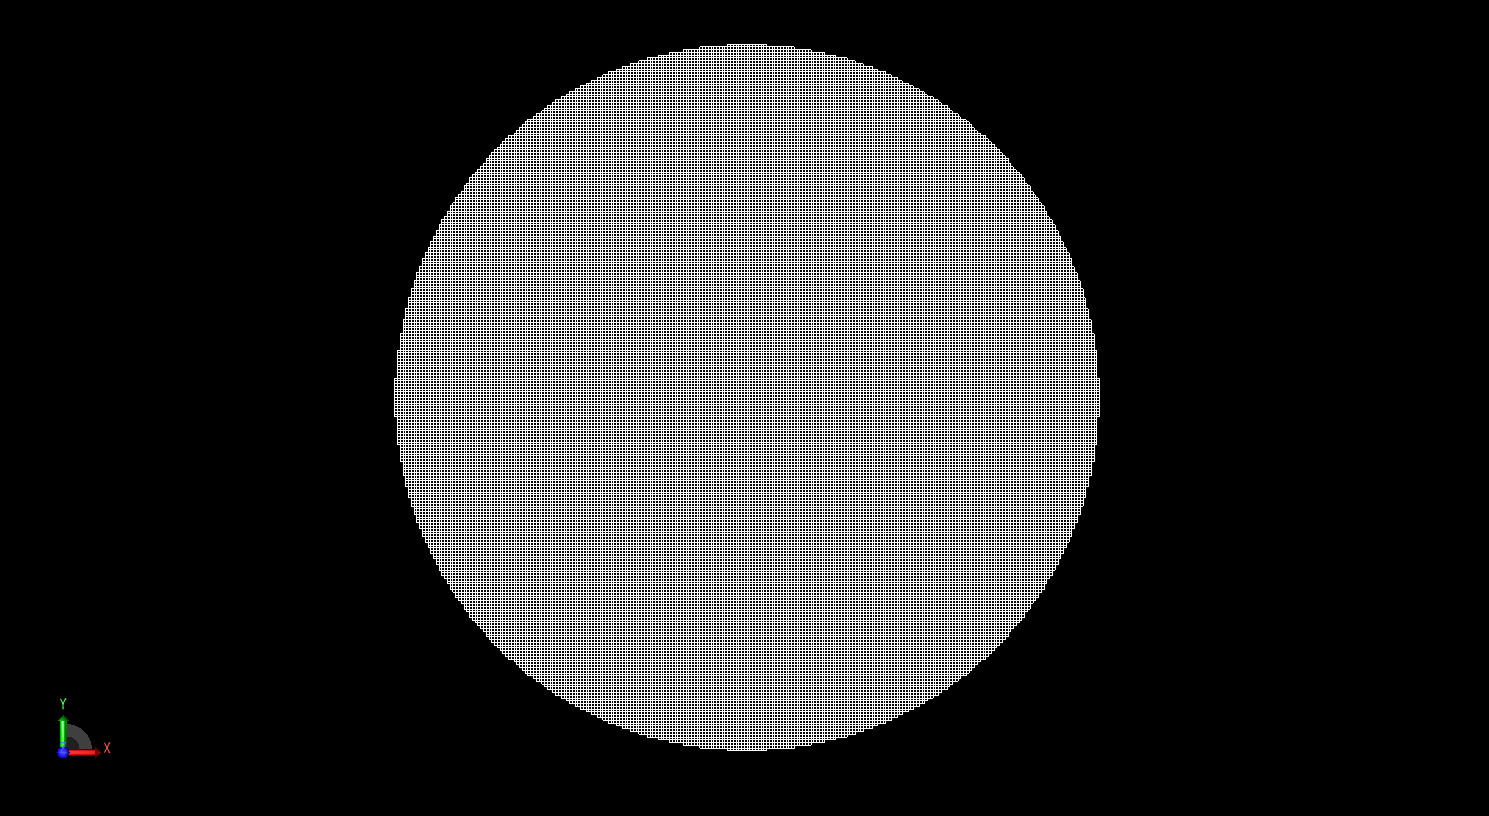 Figure 2The sphere shown meshed in the FDTD grid at a cell size of 1 mm.